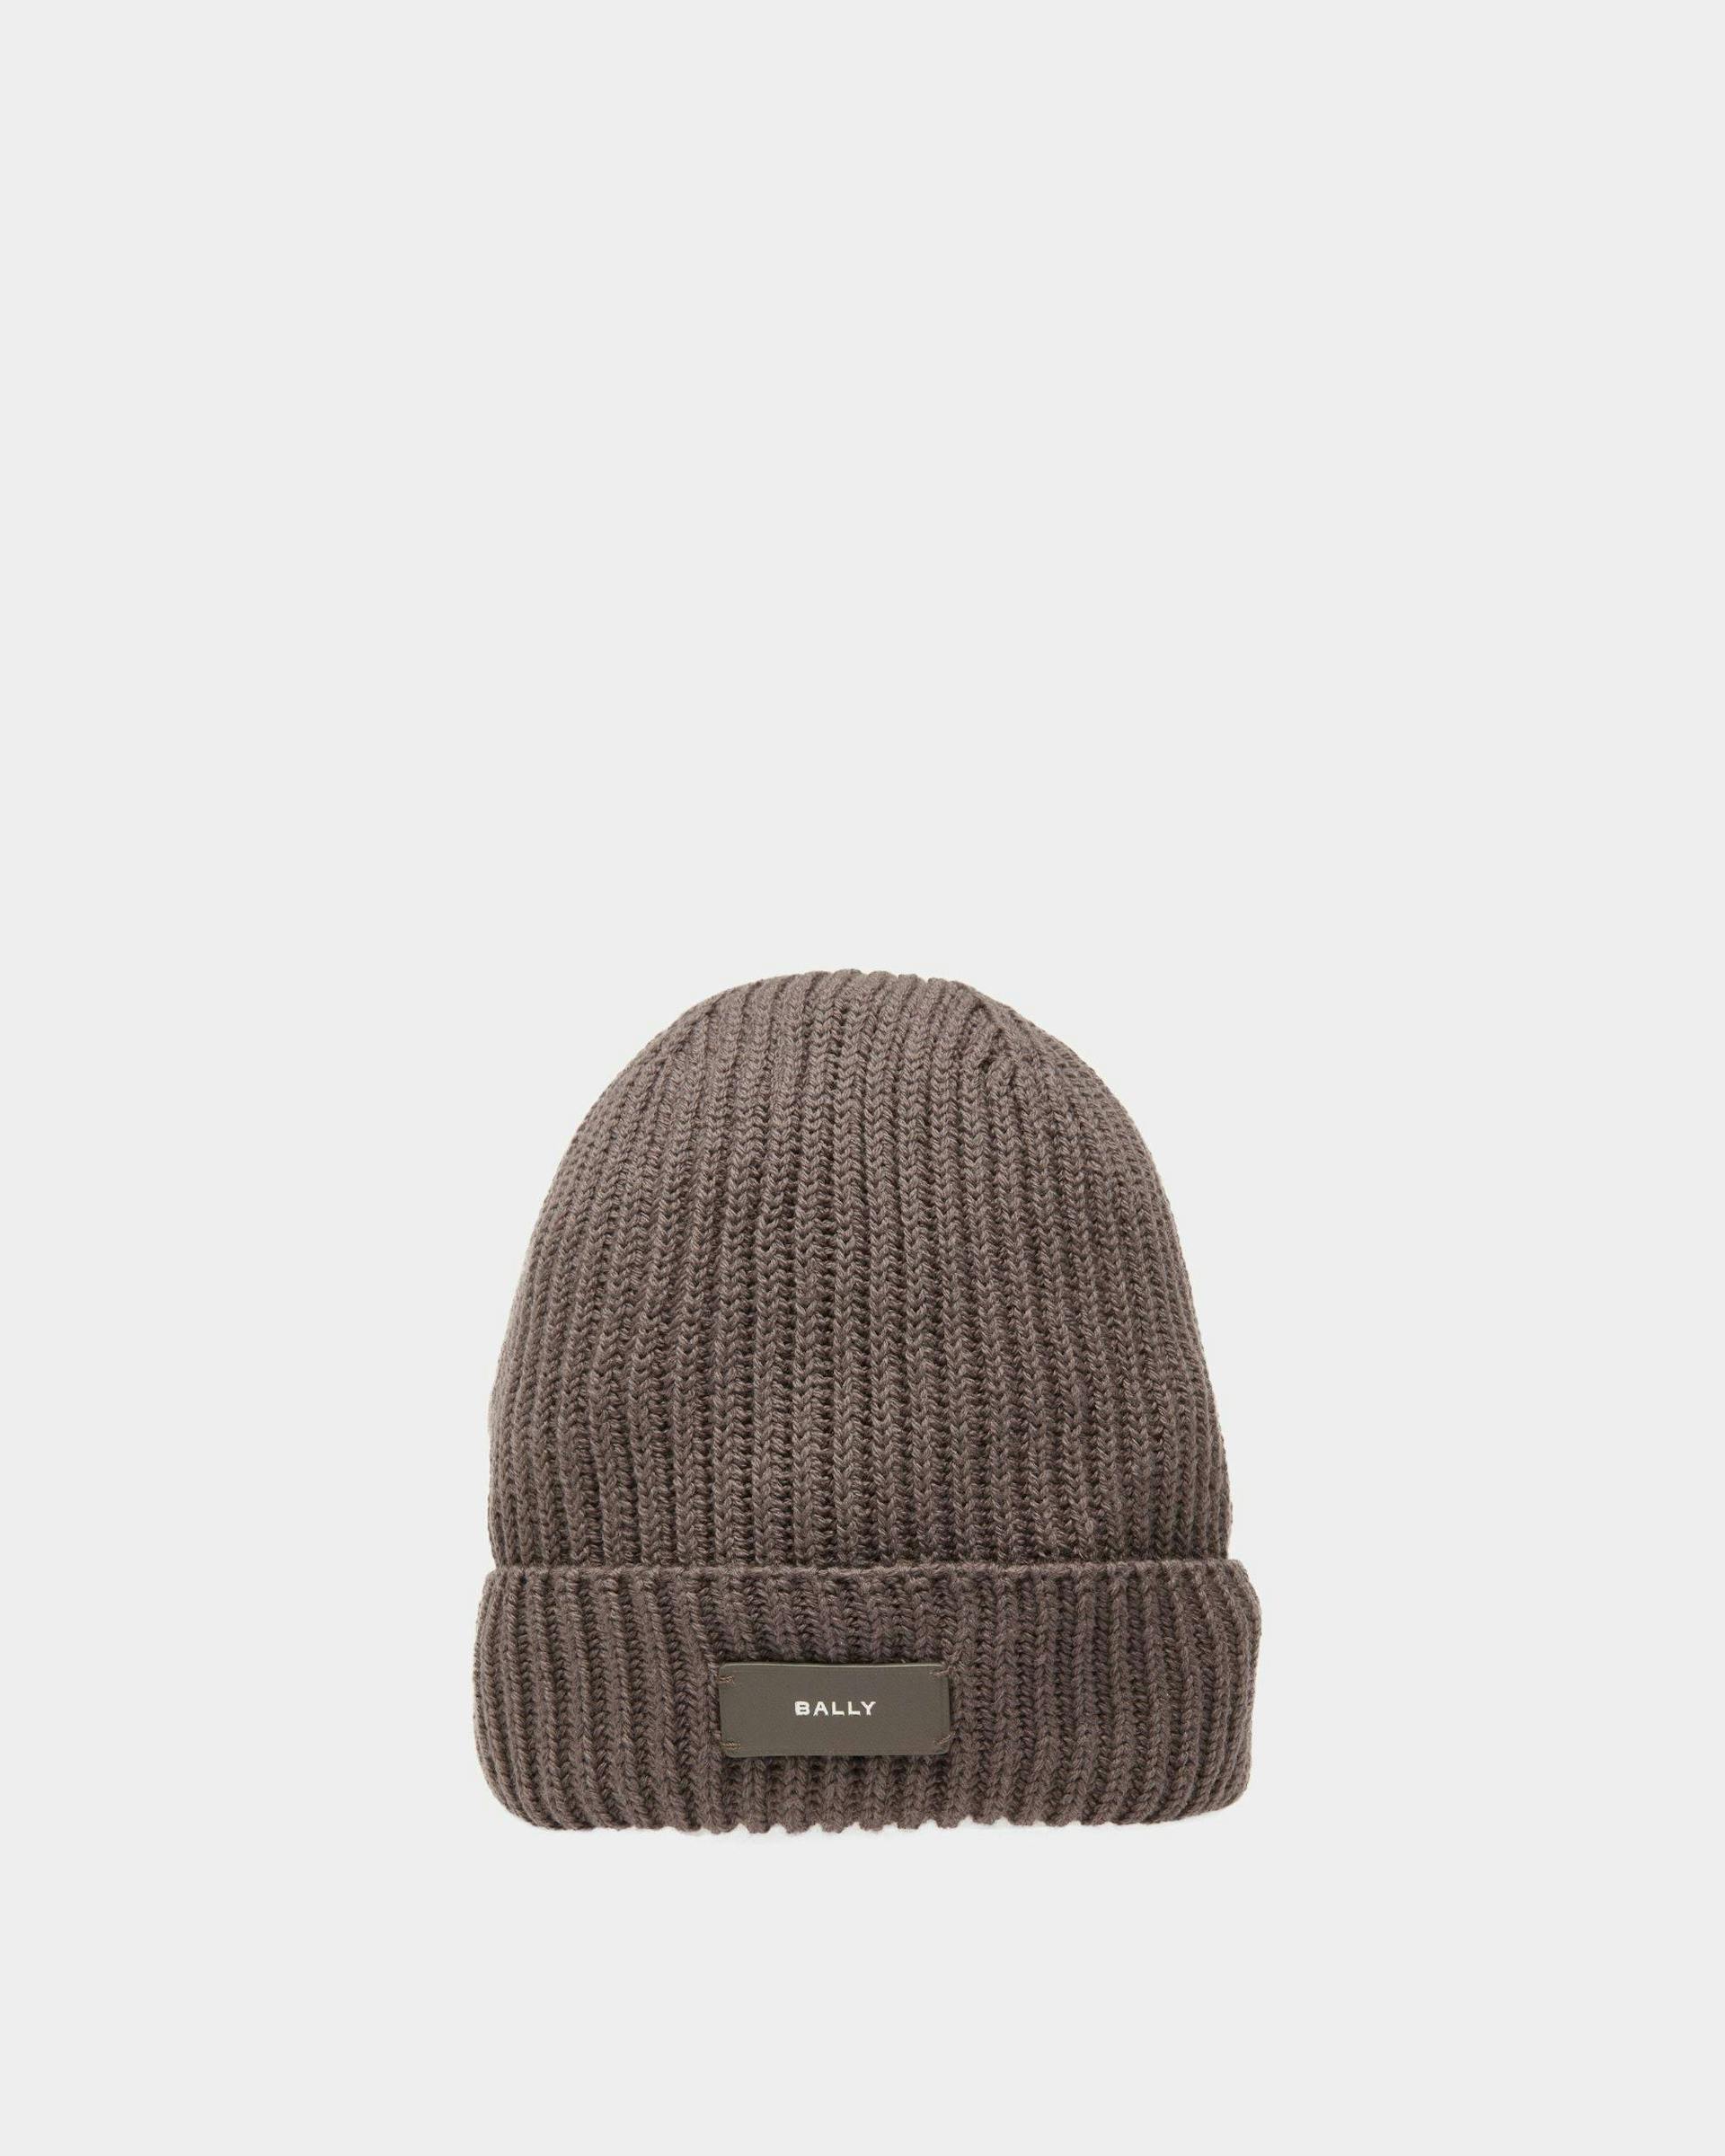 Men's Ribbed Beanie Hat In Dark Mineral Wool | Bally | Still Life Front